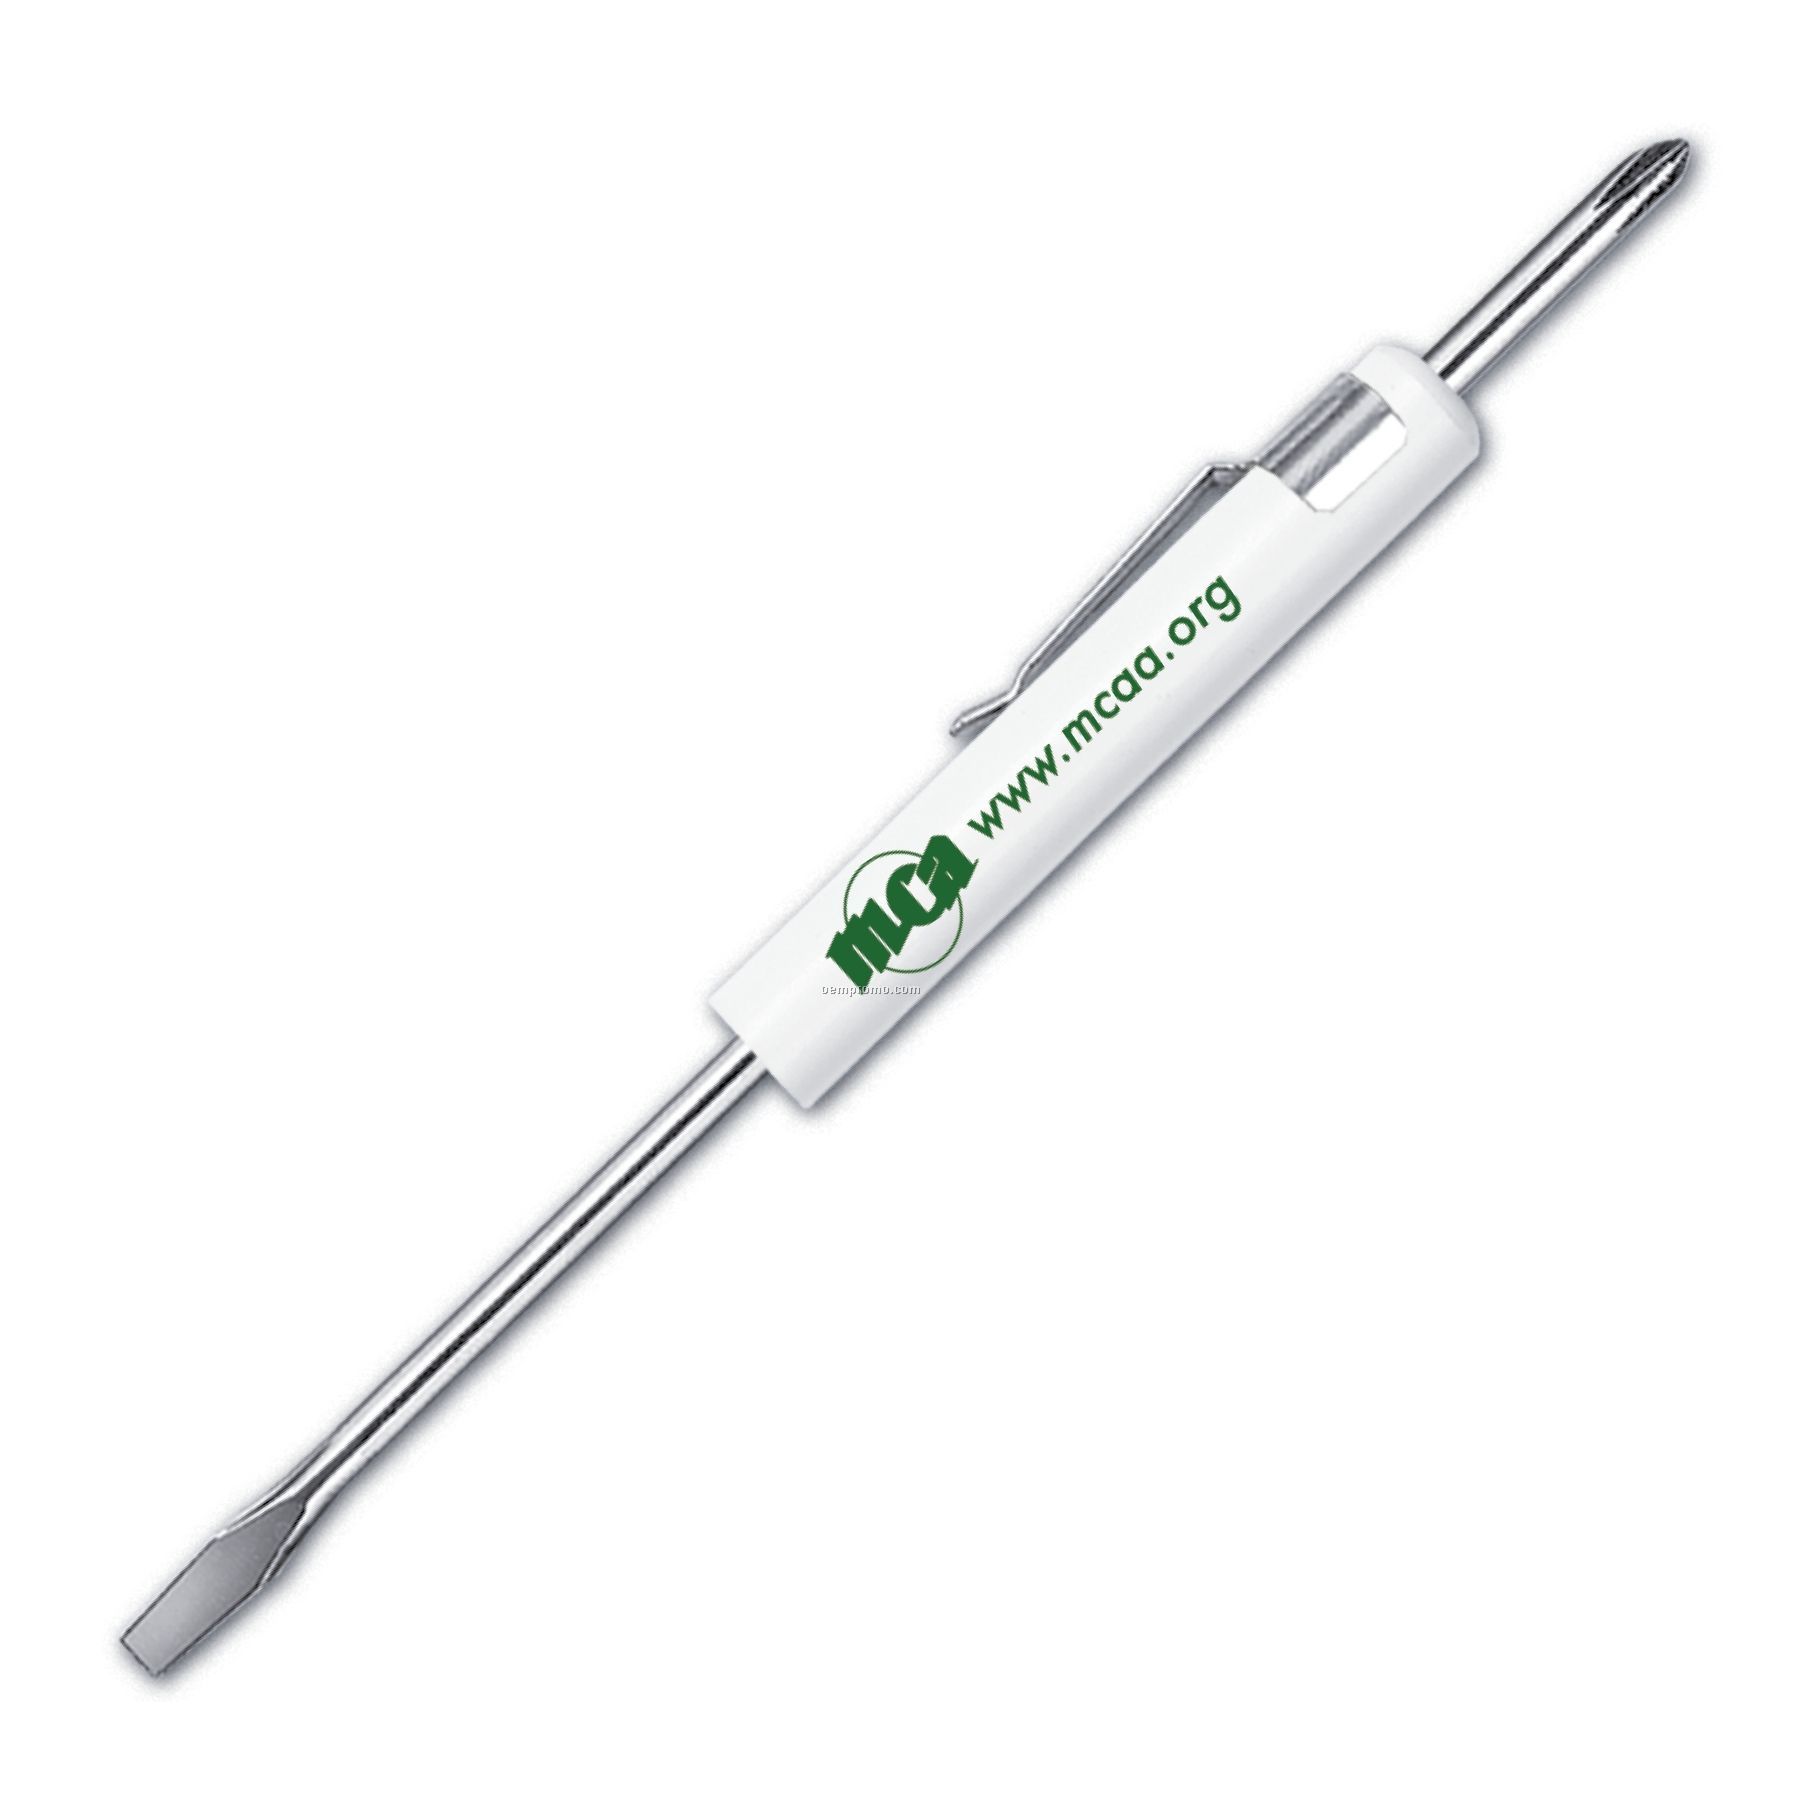 Pocket Screwdrivers - Double Ended